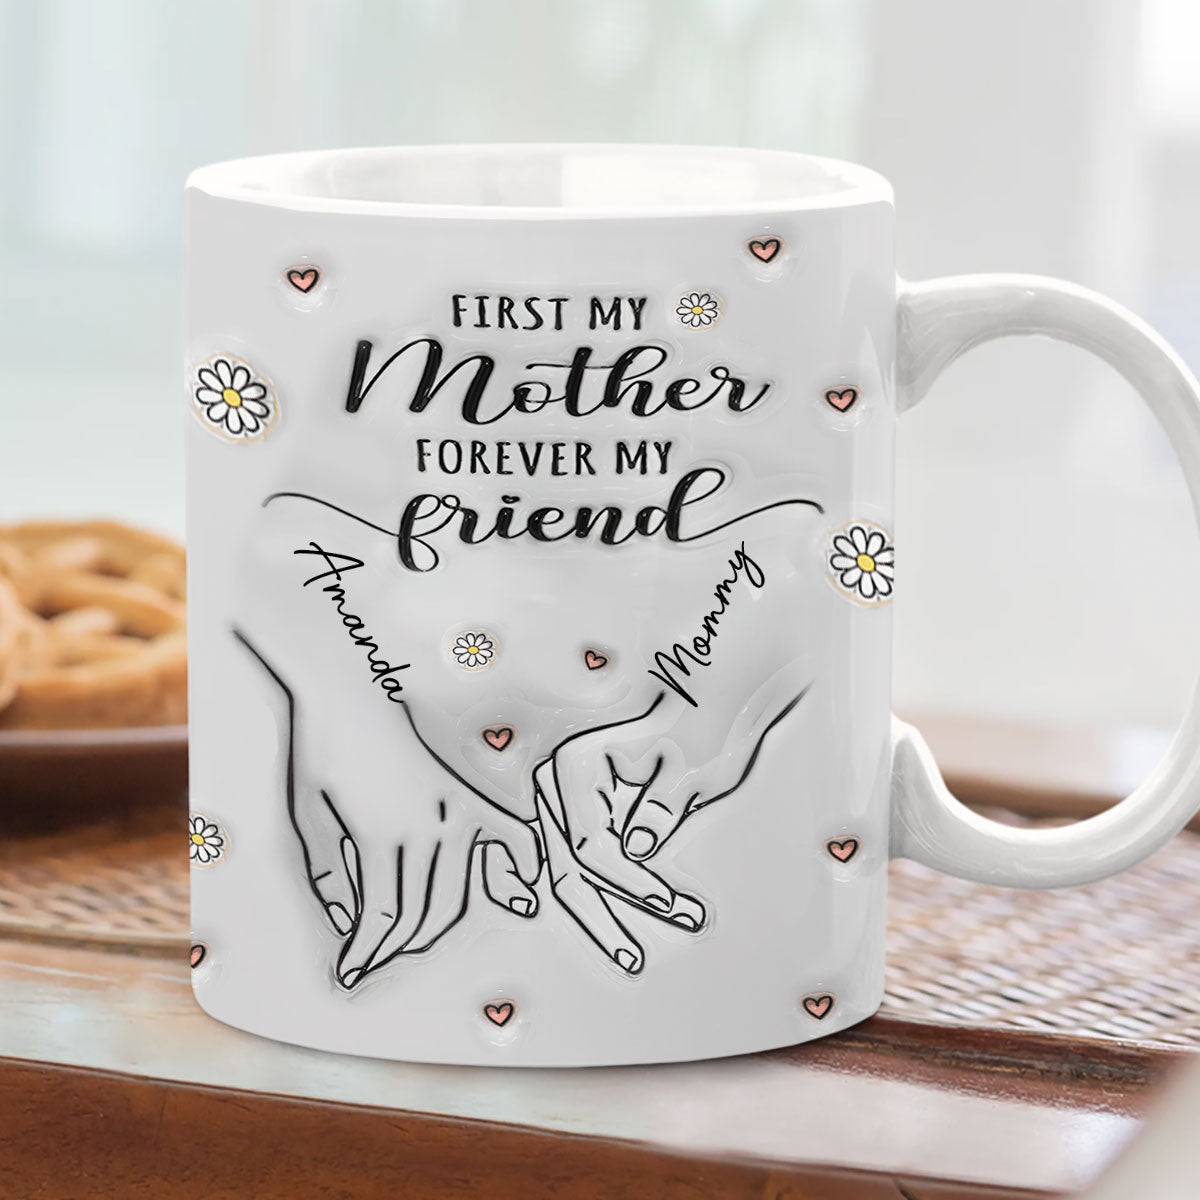 Discover First My Mother Forever My Friend - Personalized Mother Mug